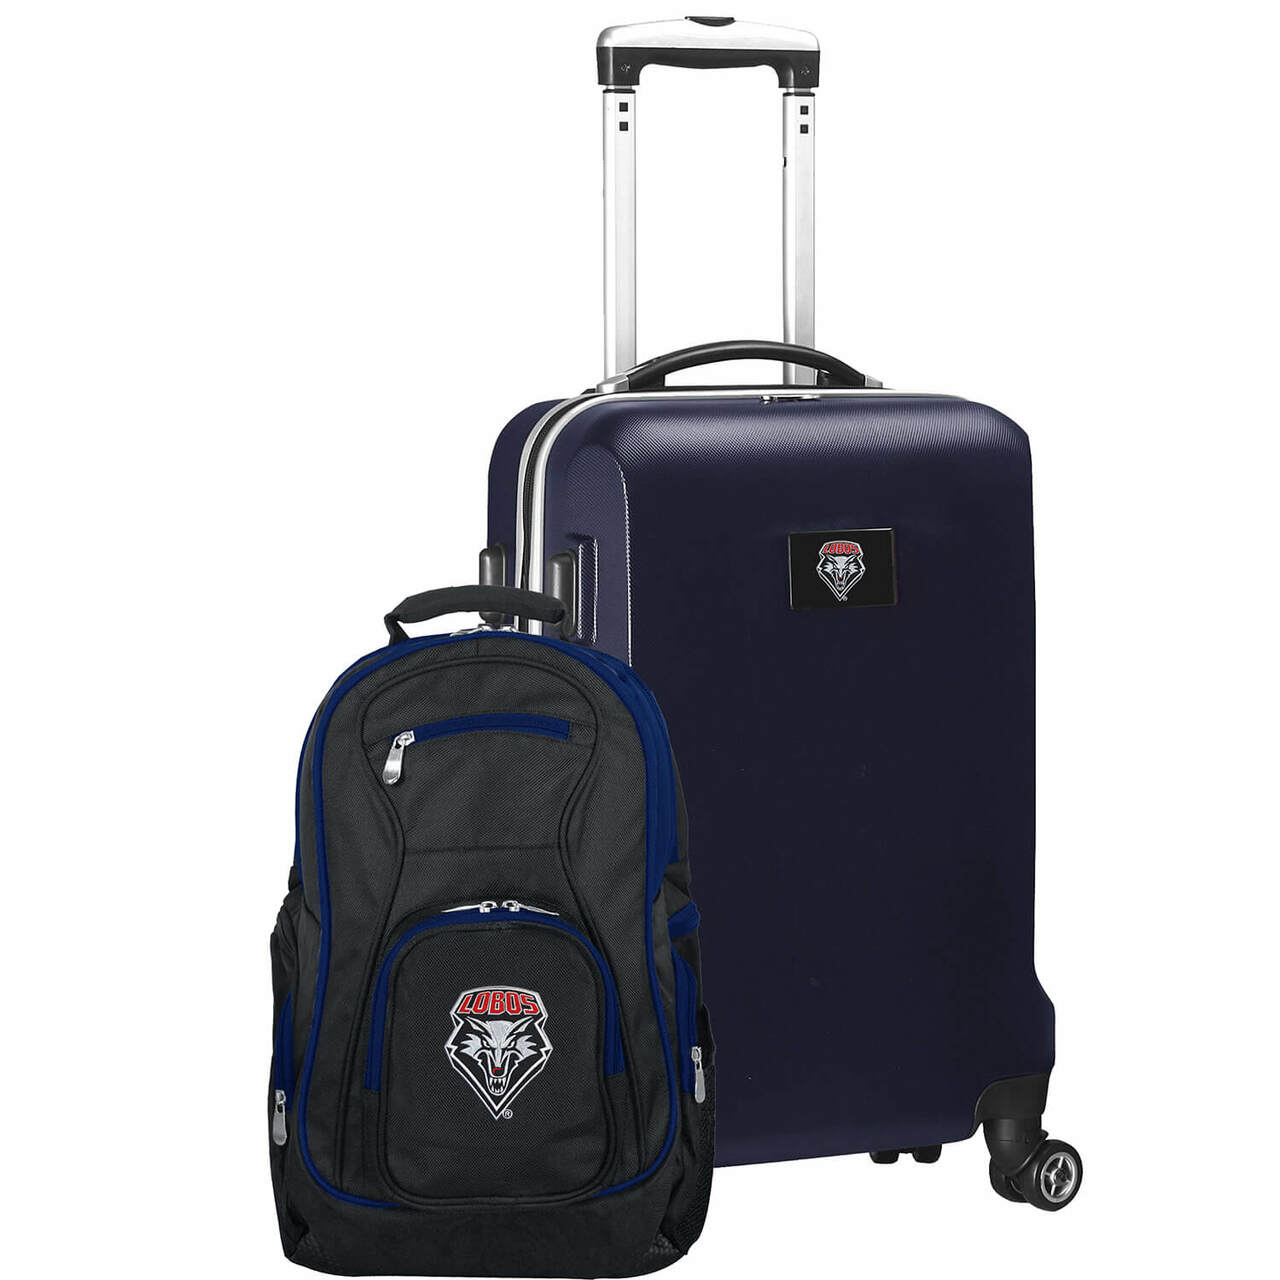 New Mexico Lobos Deluxe 2-Piece Backpack and Carry-on Set in Navy